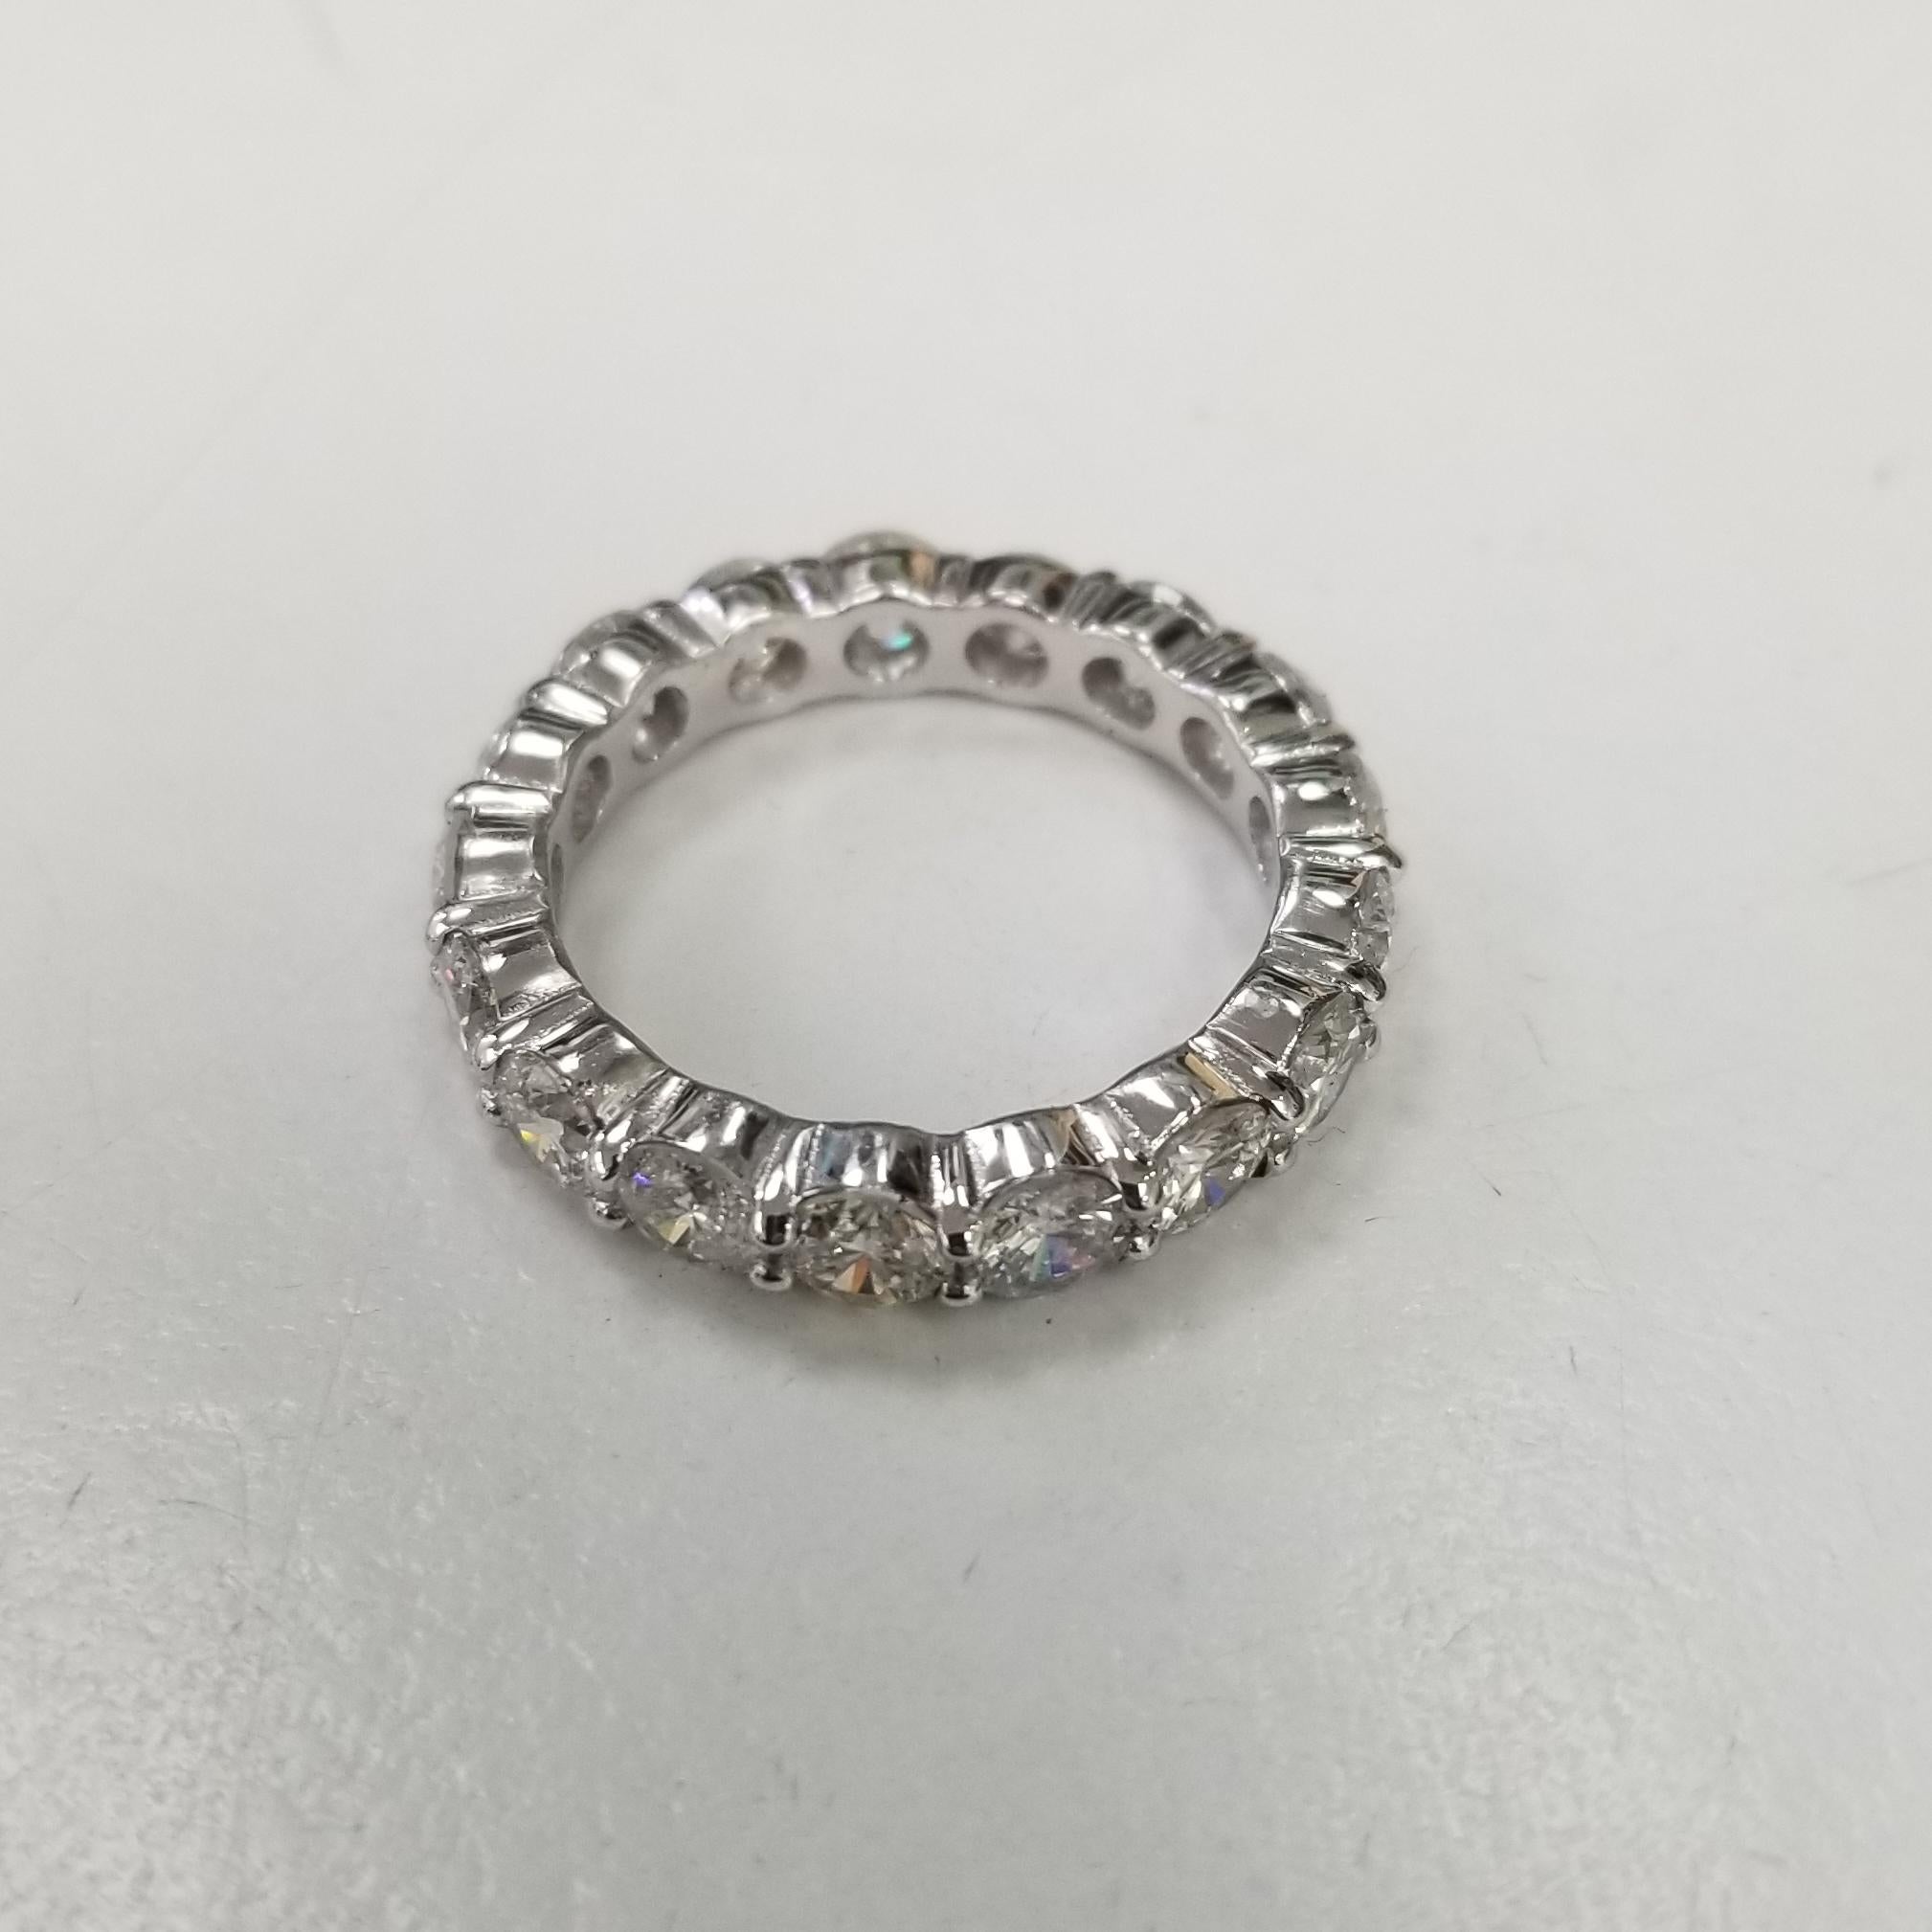 14k white gold 4.08 Carats Diamond Eternity Ring Set with Shared Prongs
*Motivated to Sell – Please make a Fair Offer*
Specifications:
    main stone: BRILLIANT CUT DIAMOND
    diamonds: 17 PIECES
    carat total weight: 4.08
    color:  G
   